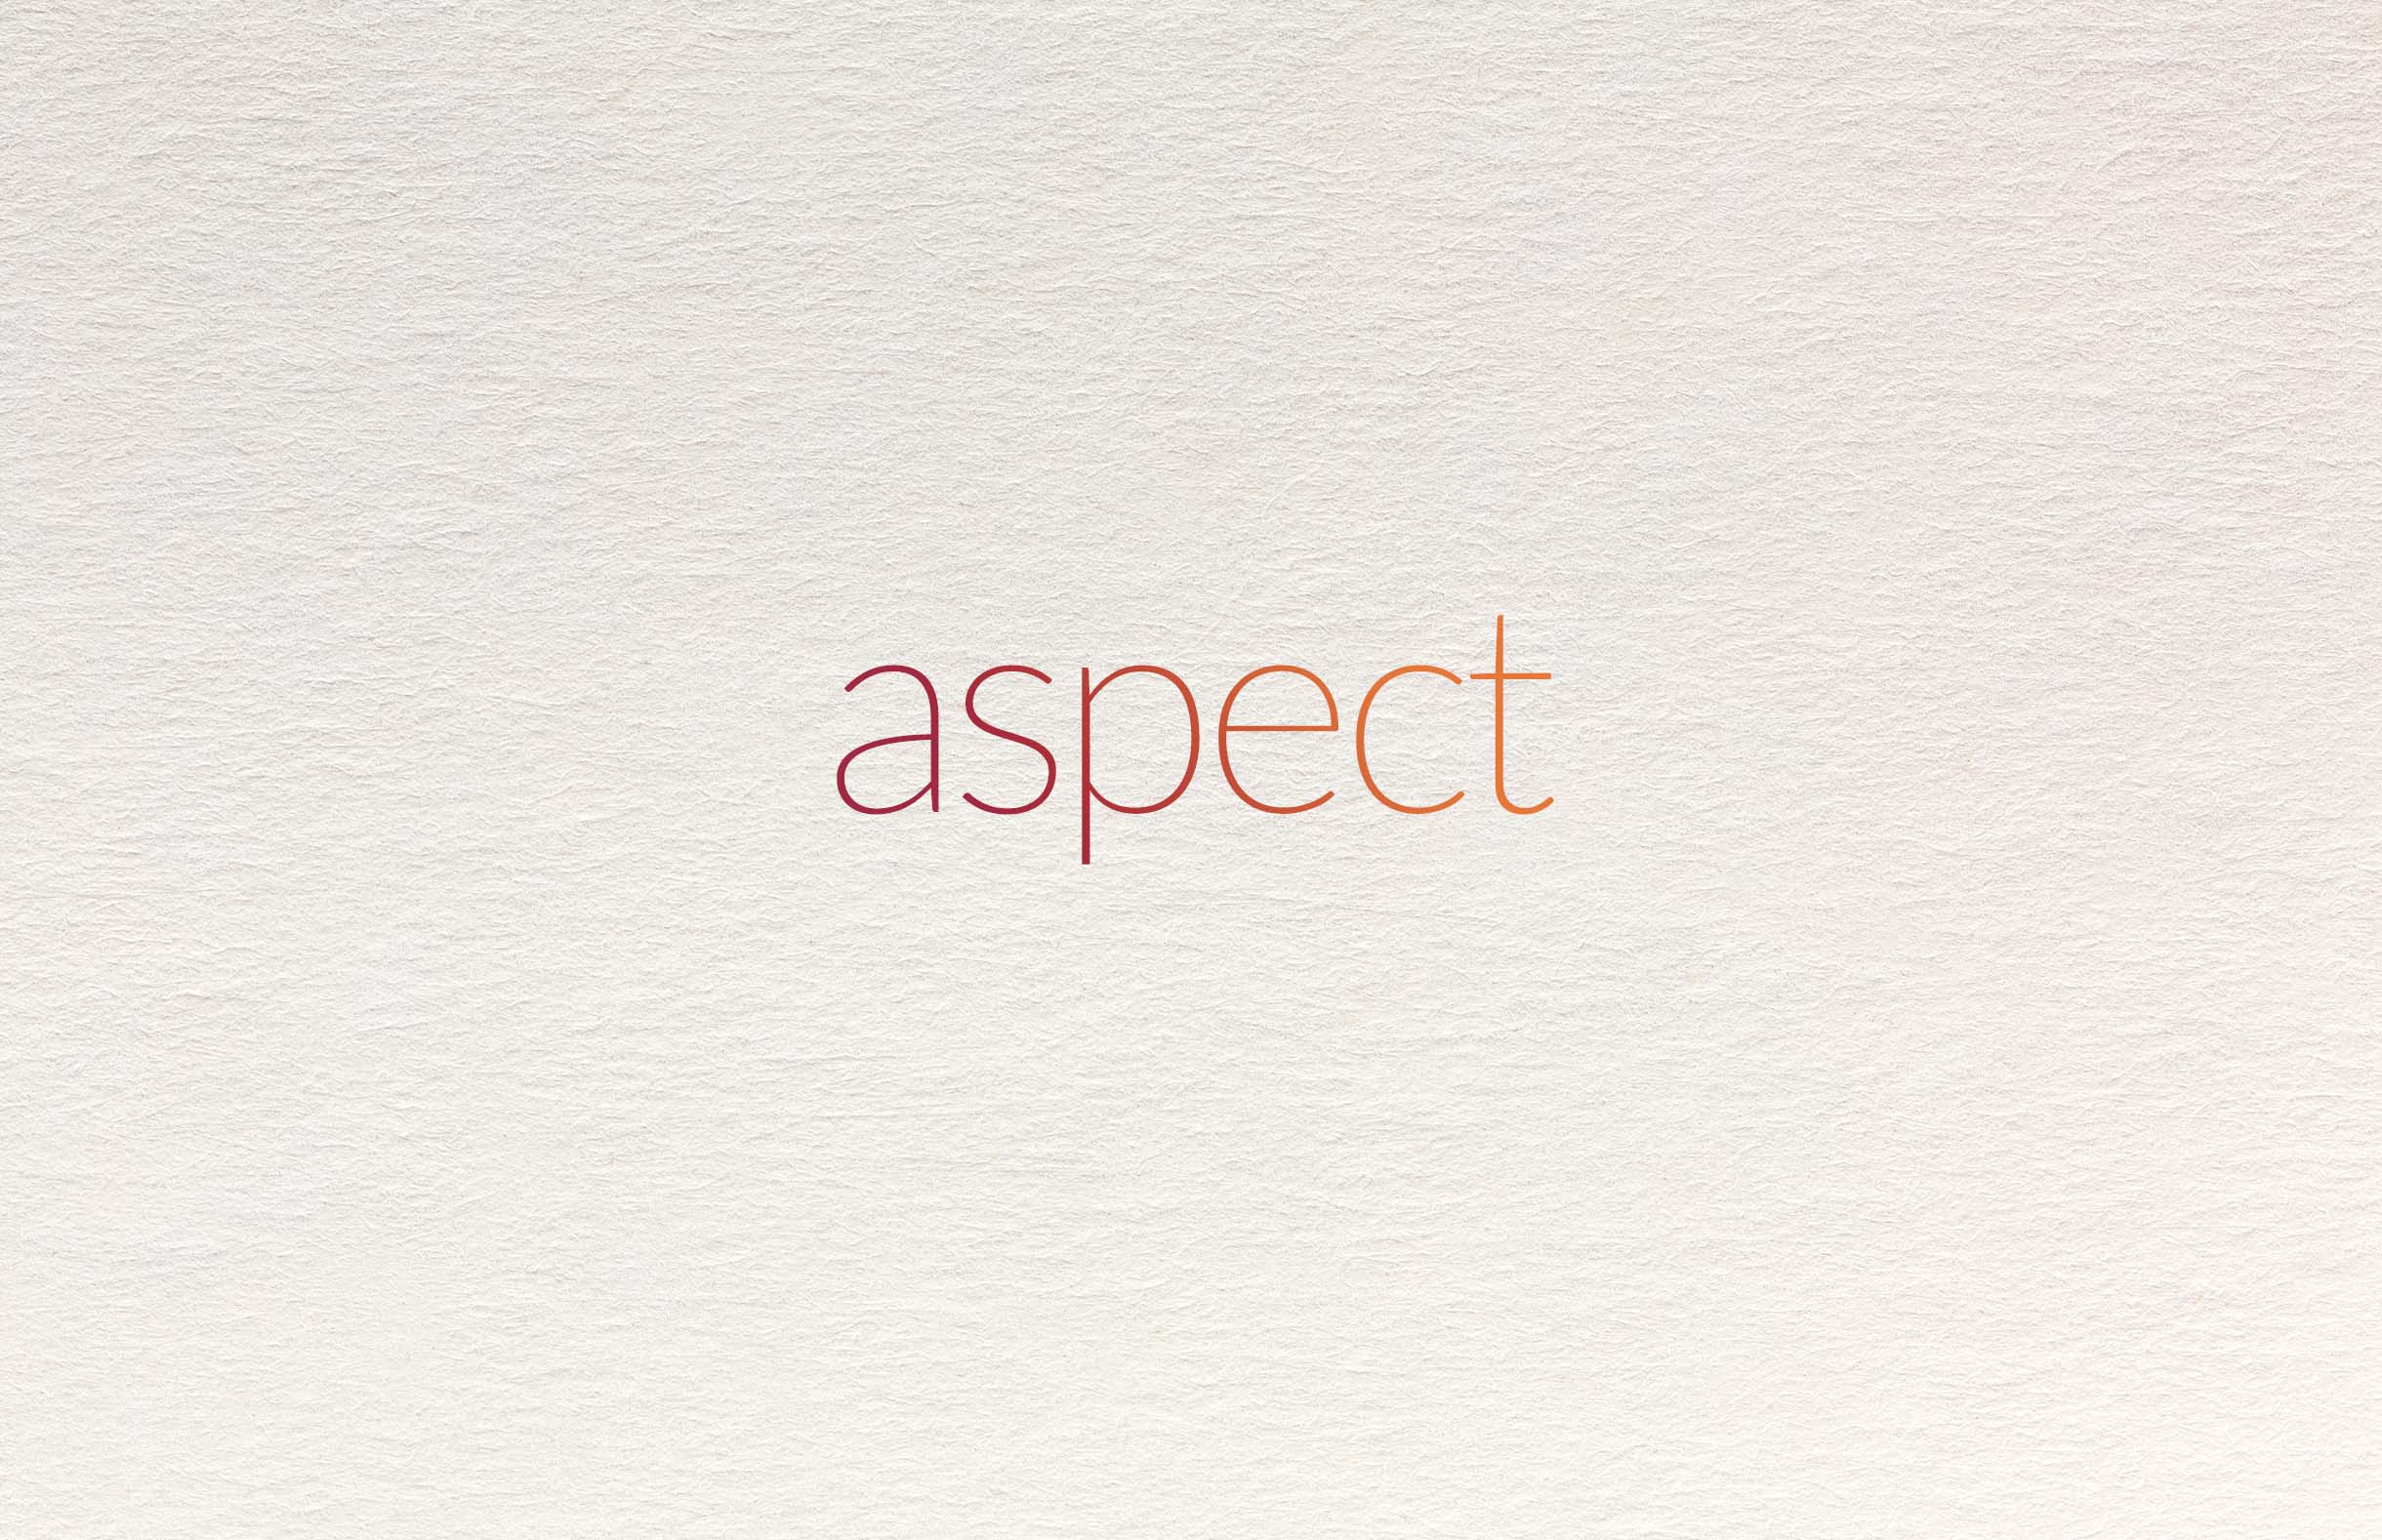 Aspect Board new launch header images